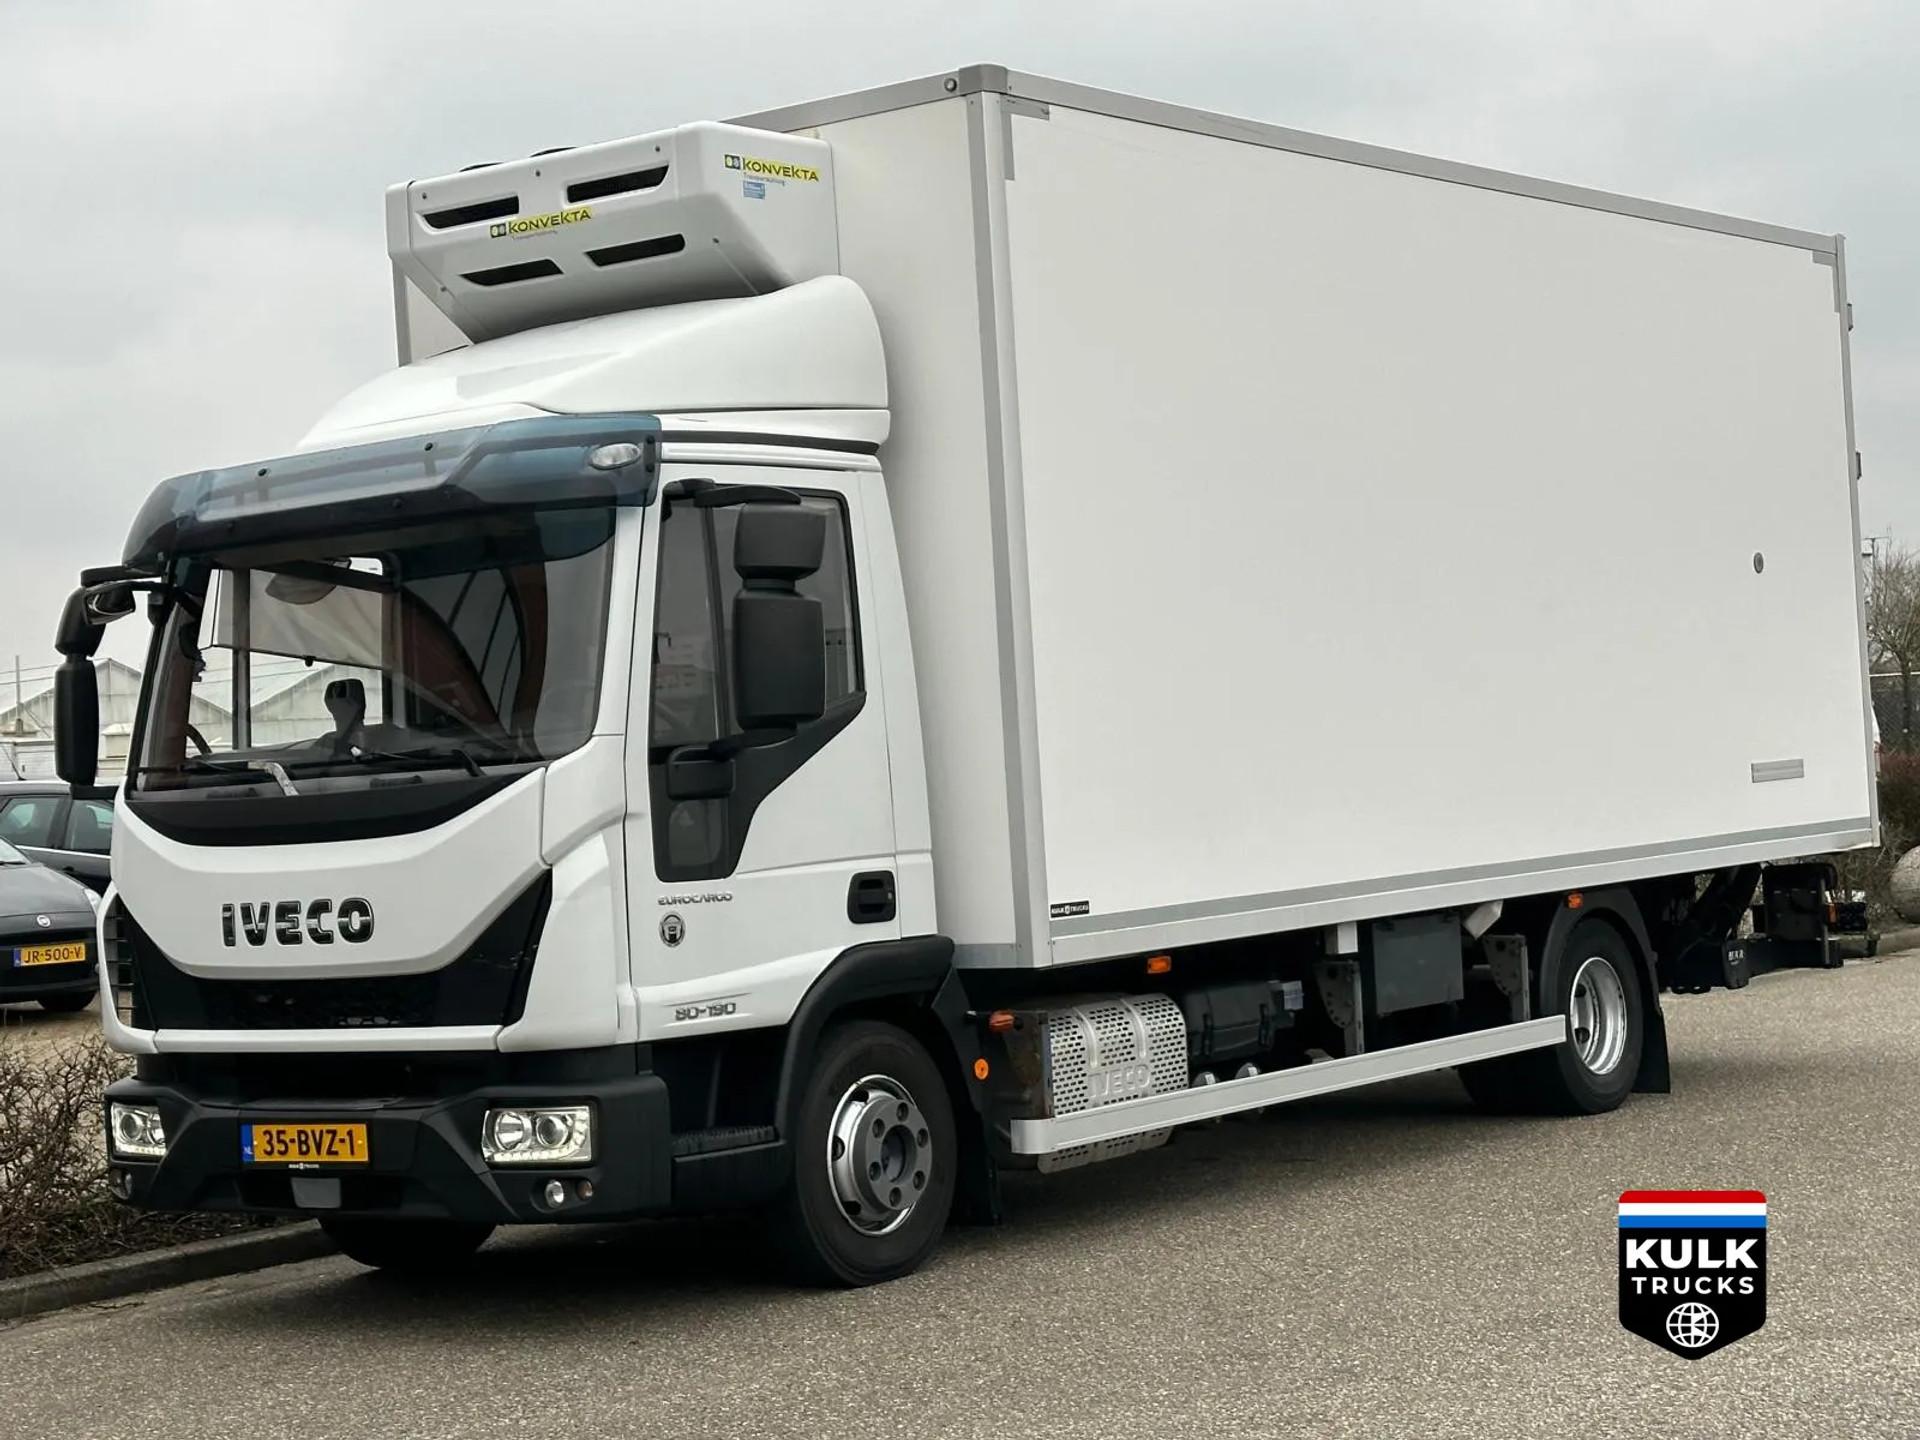 Foto 1 van Iveco EUROCARGO 80 190 DAY NIGHT REFRIG. / TAIL LIFT